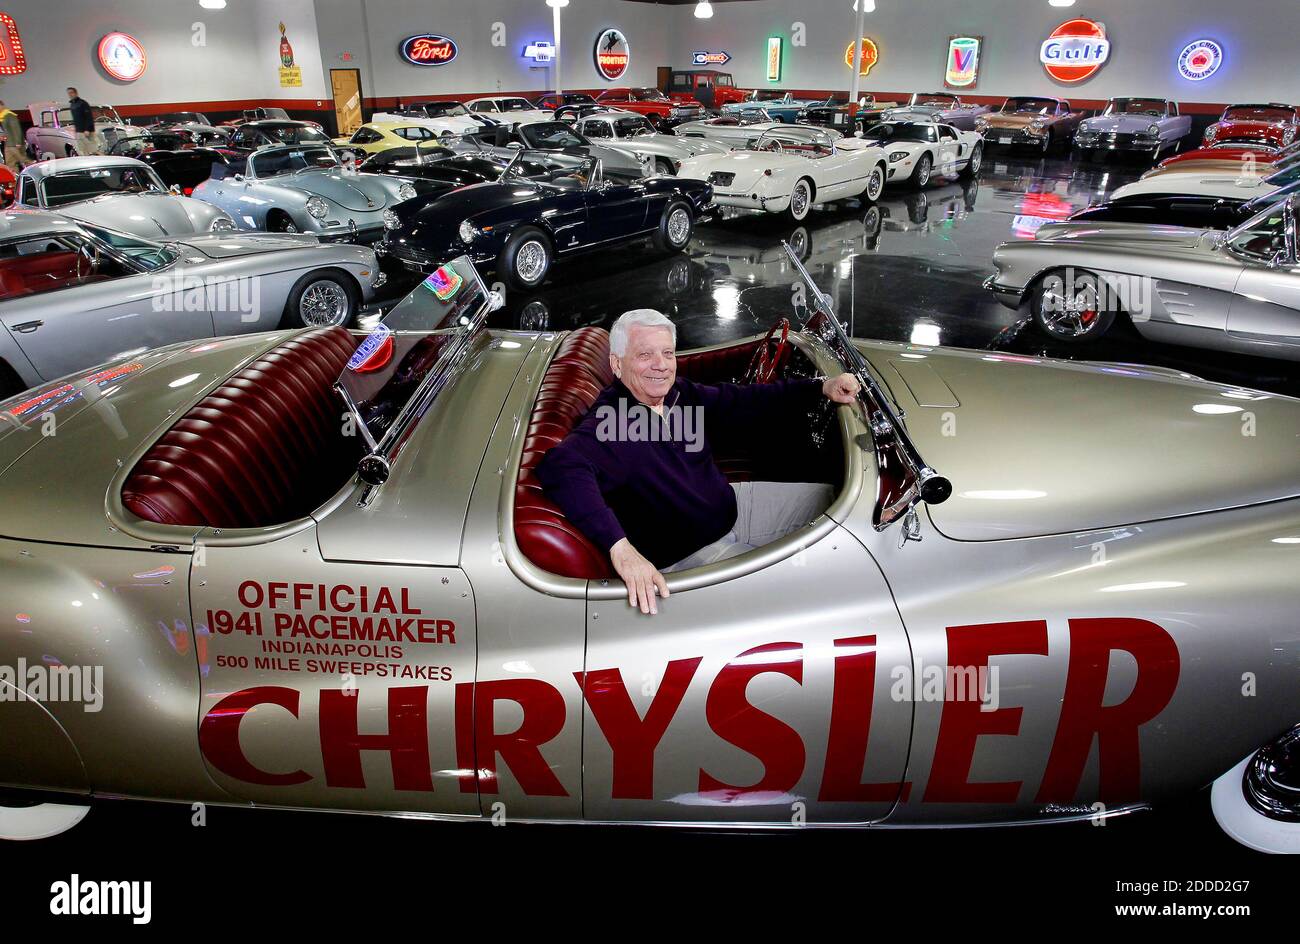 NO FILM, NO VIDEO, NO TV, NO DOCUMENTARY - North Texas car dealer Don Davis is selling some of his vast collection of rare cars including this 1941 Chrysler Newport Indianapolis 500 Pacemaker . Photo by Paul Mosely/Fort Worth Star-Telegram/MCT/ABACAPRESS.COM Stock Photo